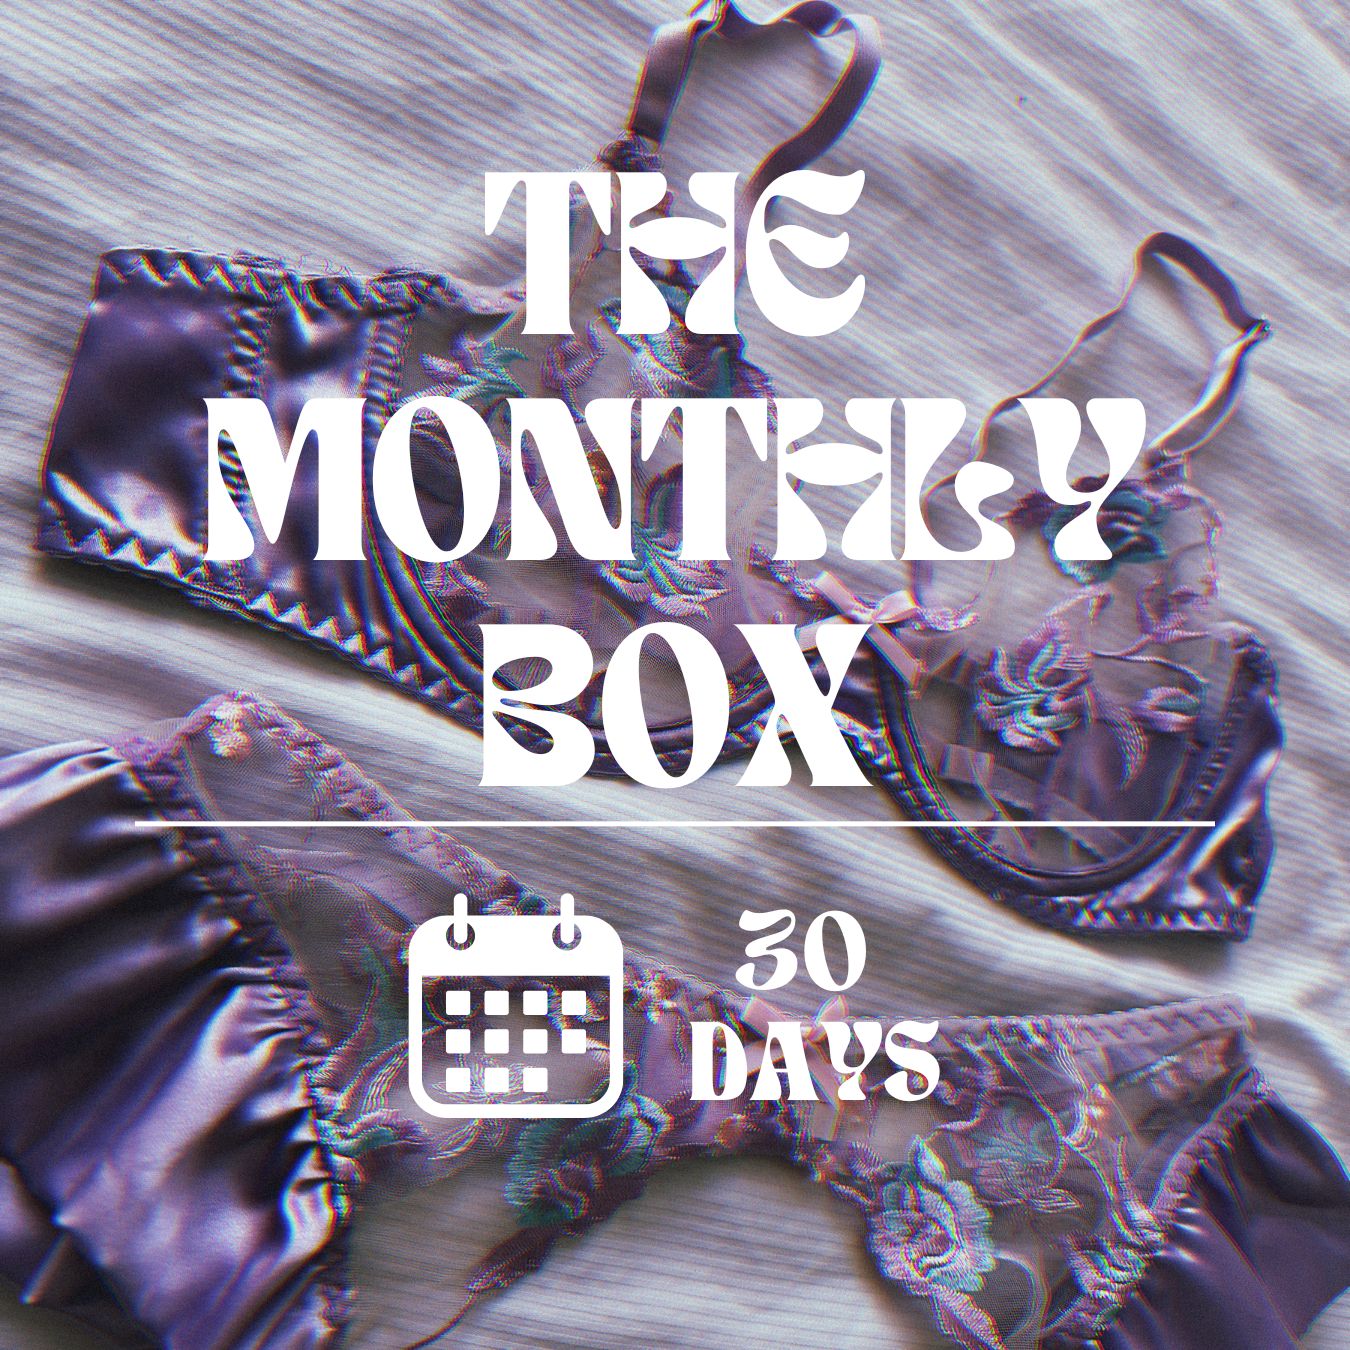 Yonifyer - The Monthly Lingerie Box - Yonifyer